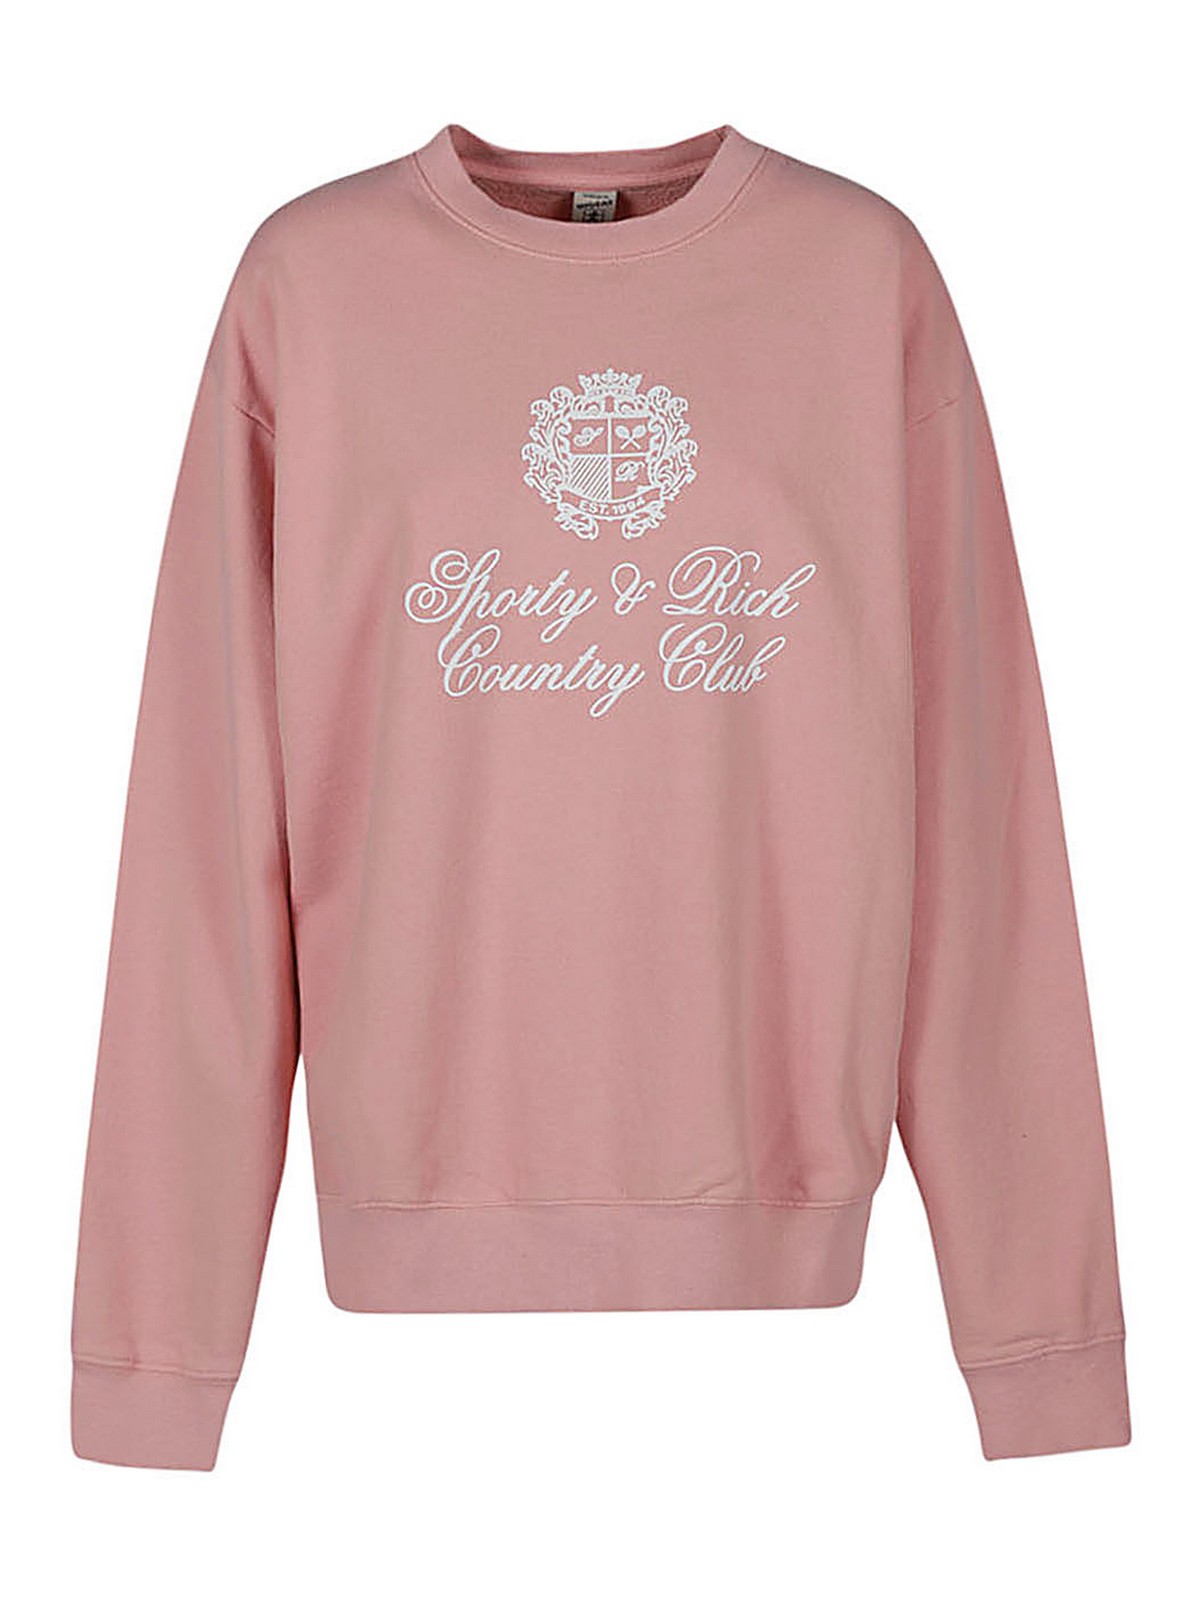 SPORTY AND RICH COUNTRY CREST COTTON SWEATSHIRT